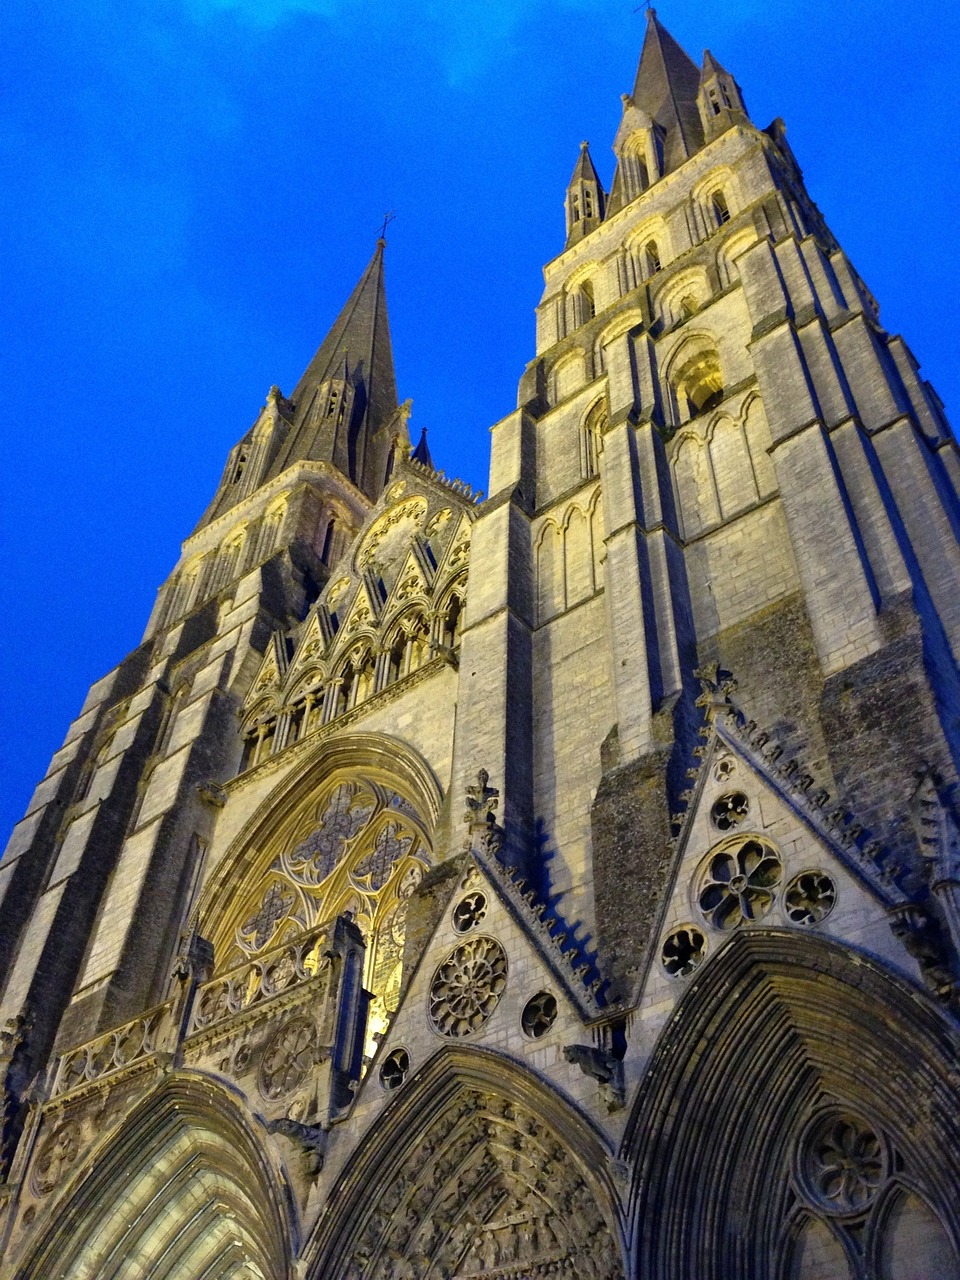 Historical and Culinary Delights in Bayeux